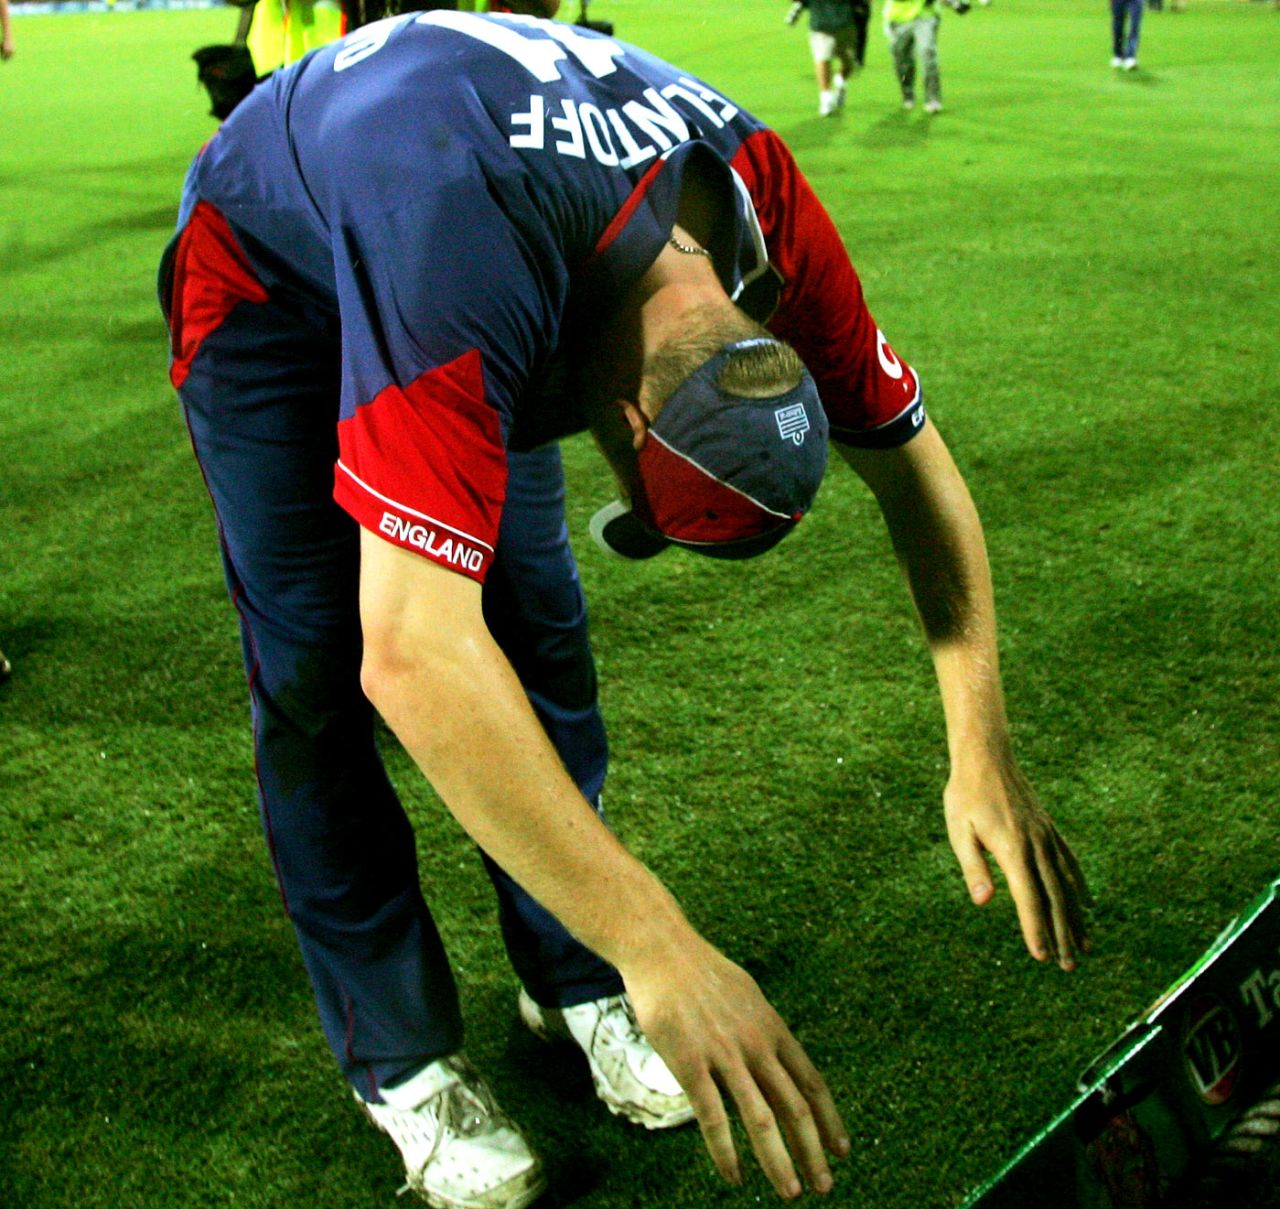 Andrew Flintoff bows to the England supporters, Australia v England, CB Series, 2nd final, Sydney, February 11, 2007